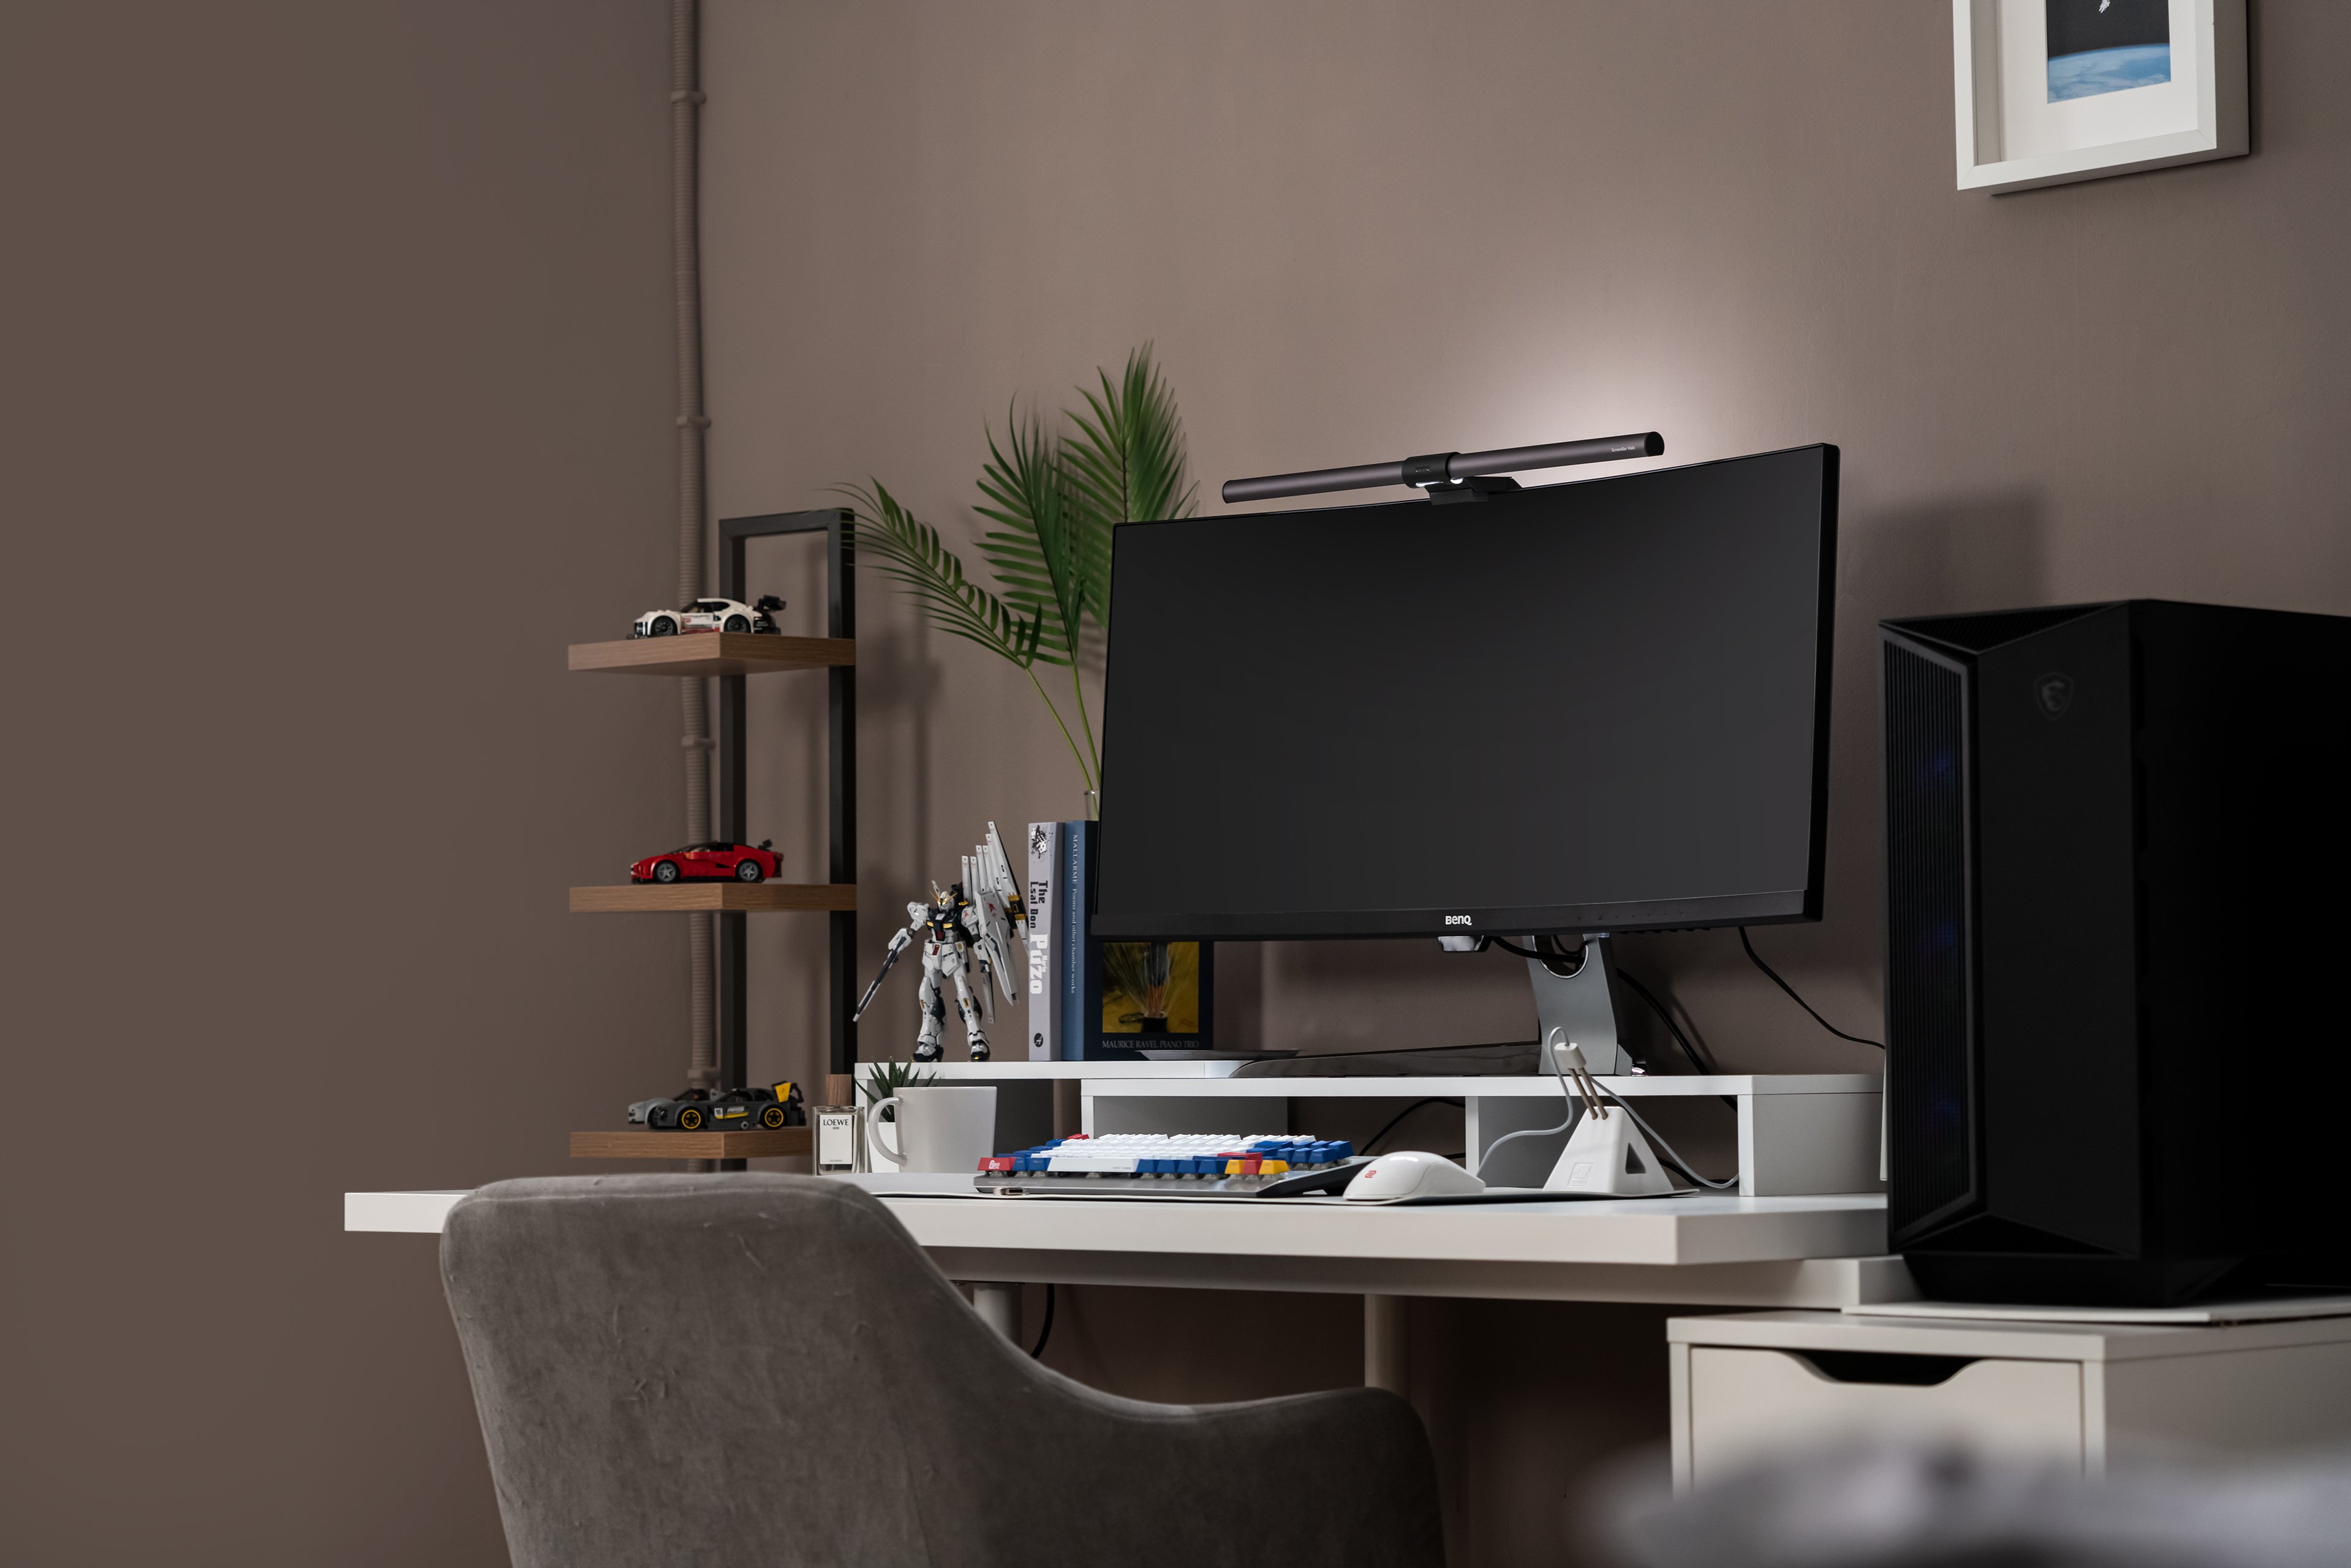 What is the purpose behind monitor lighting? Why can it save your eyes from strain over time?